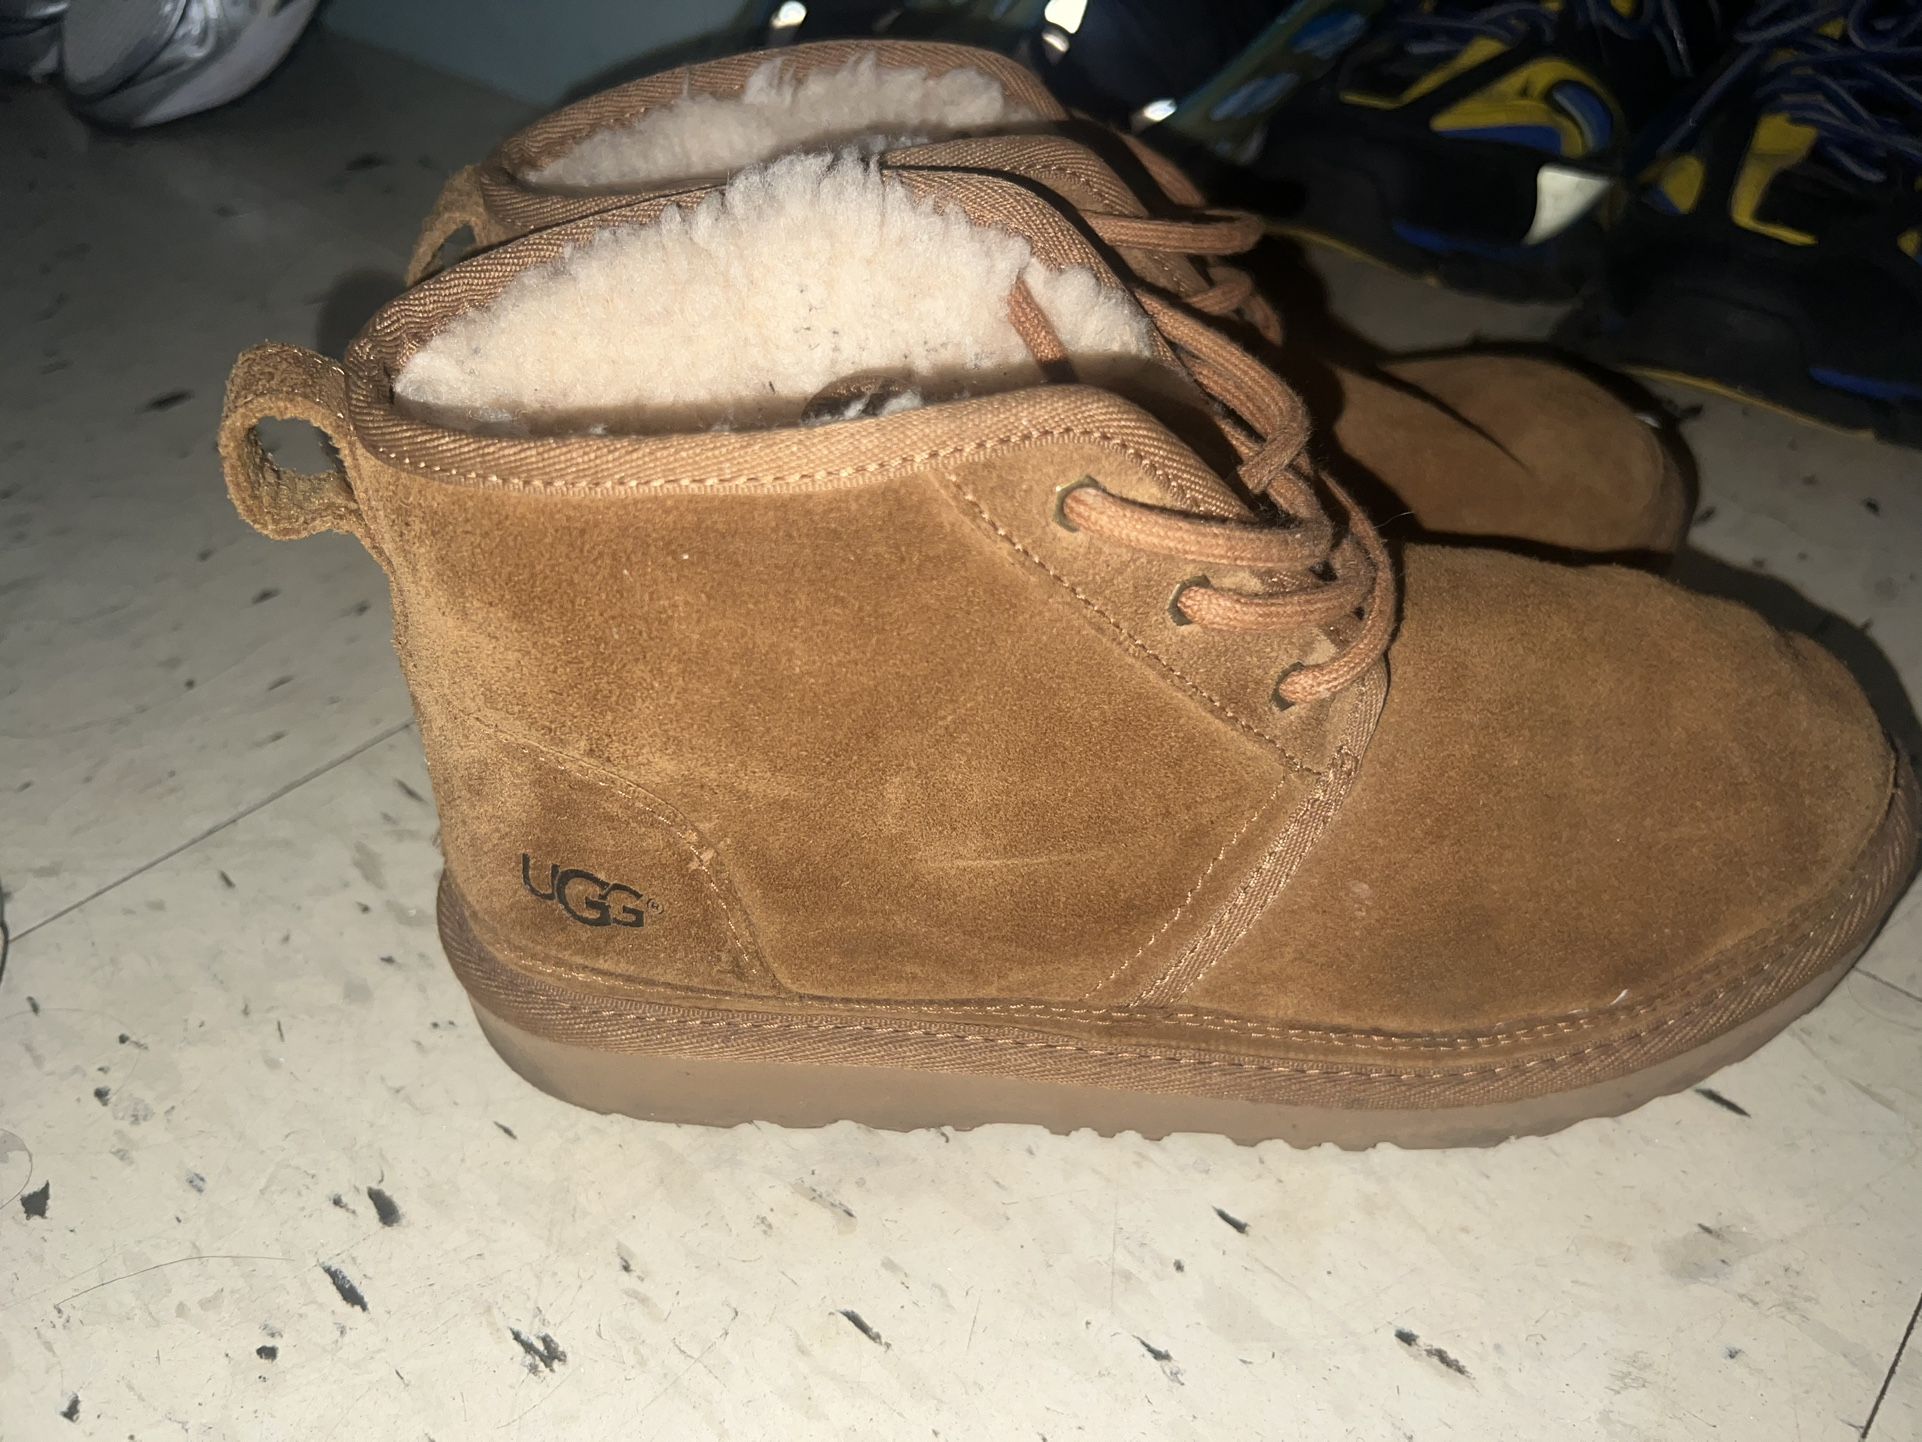 Ugg Boots Size 6.5 